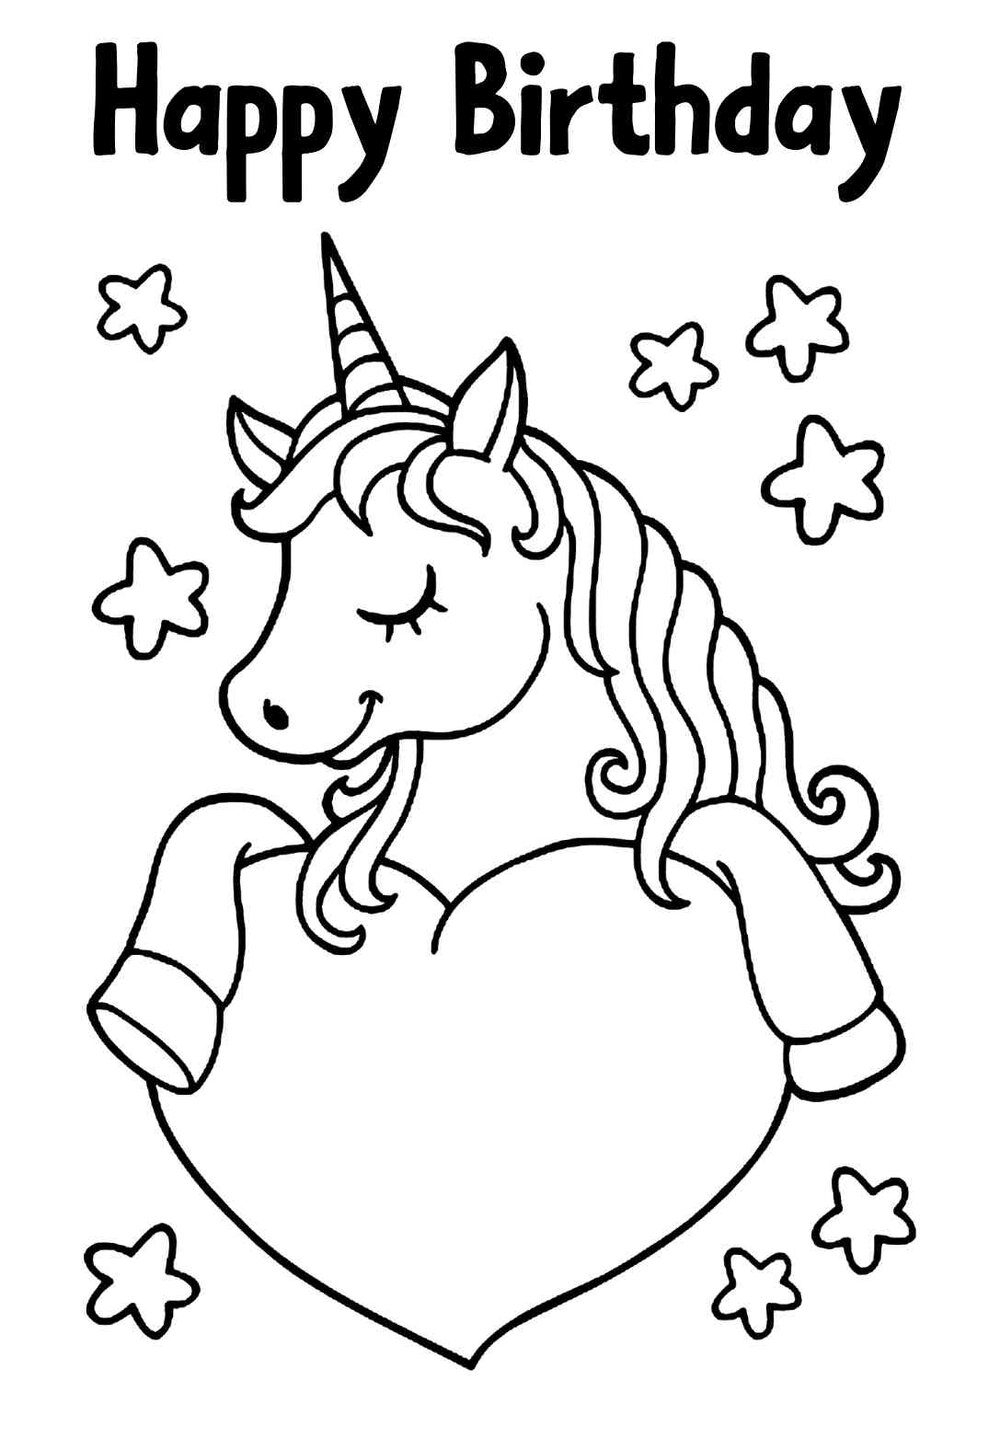 Simple Birthday Coloring Pages & Cards for Toddlers free ...